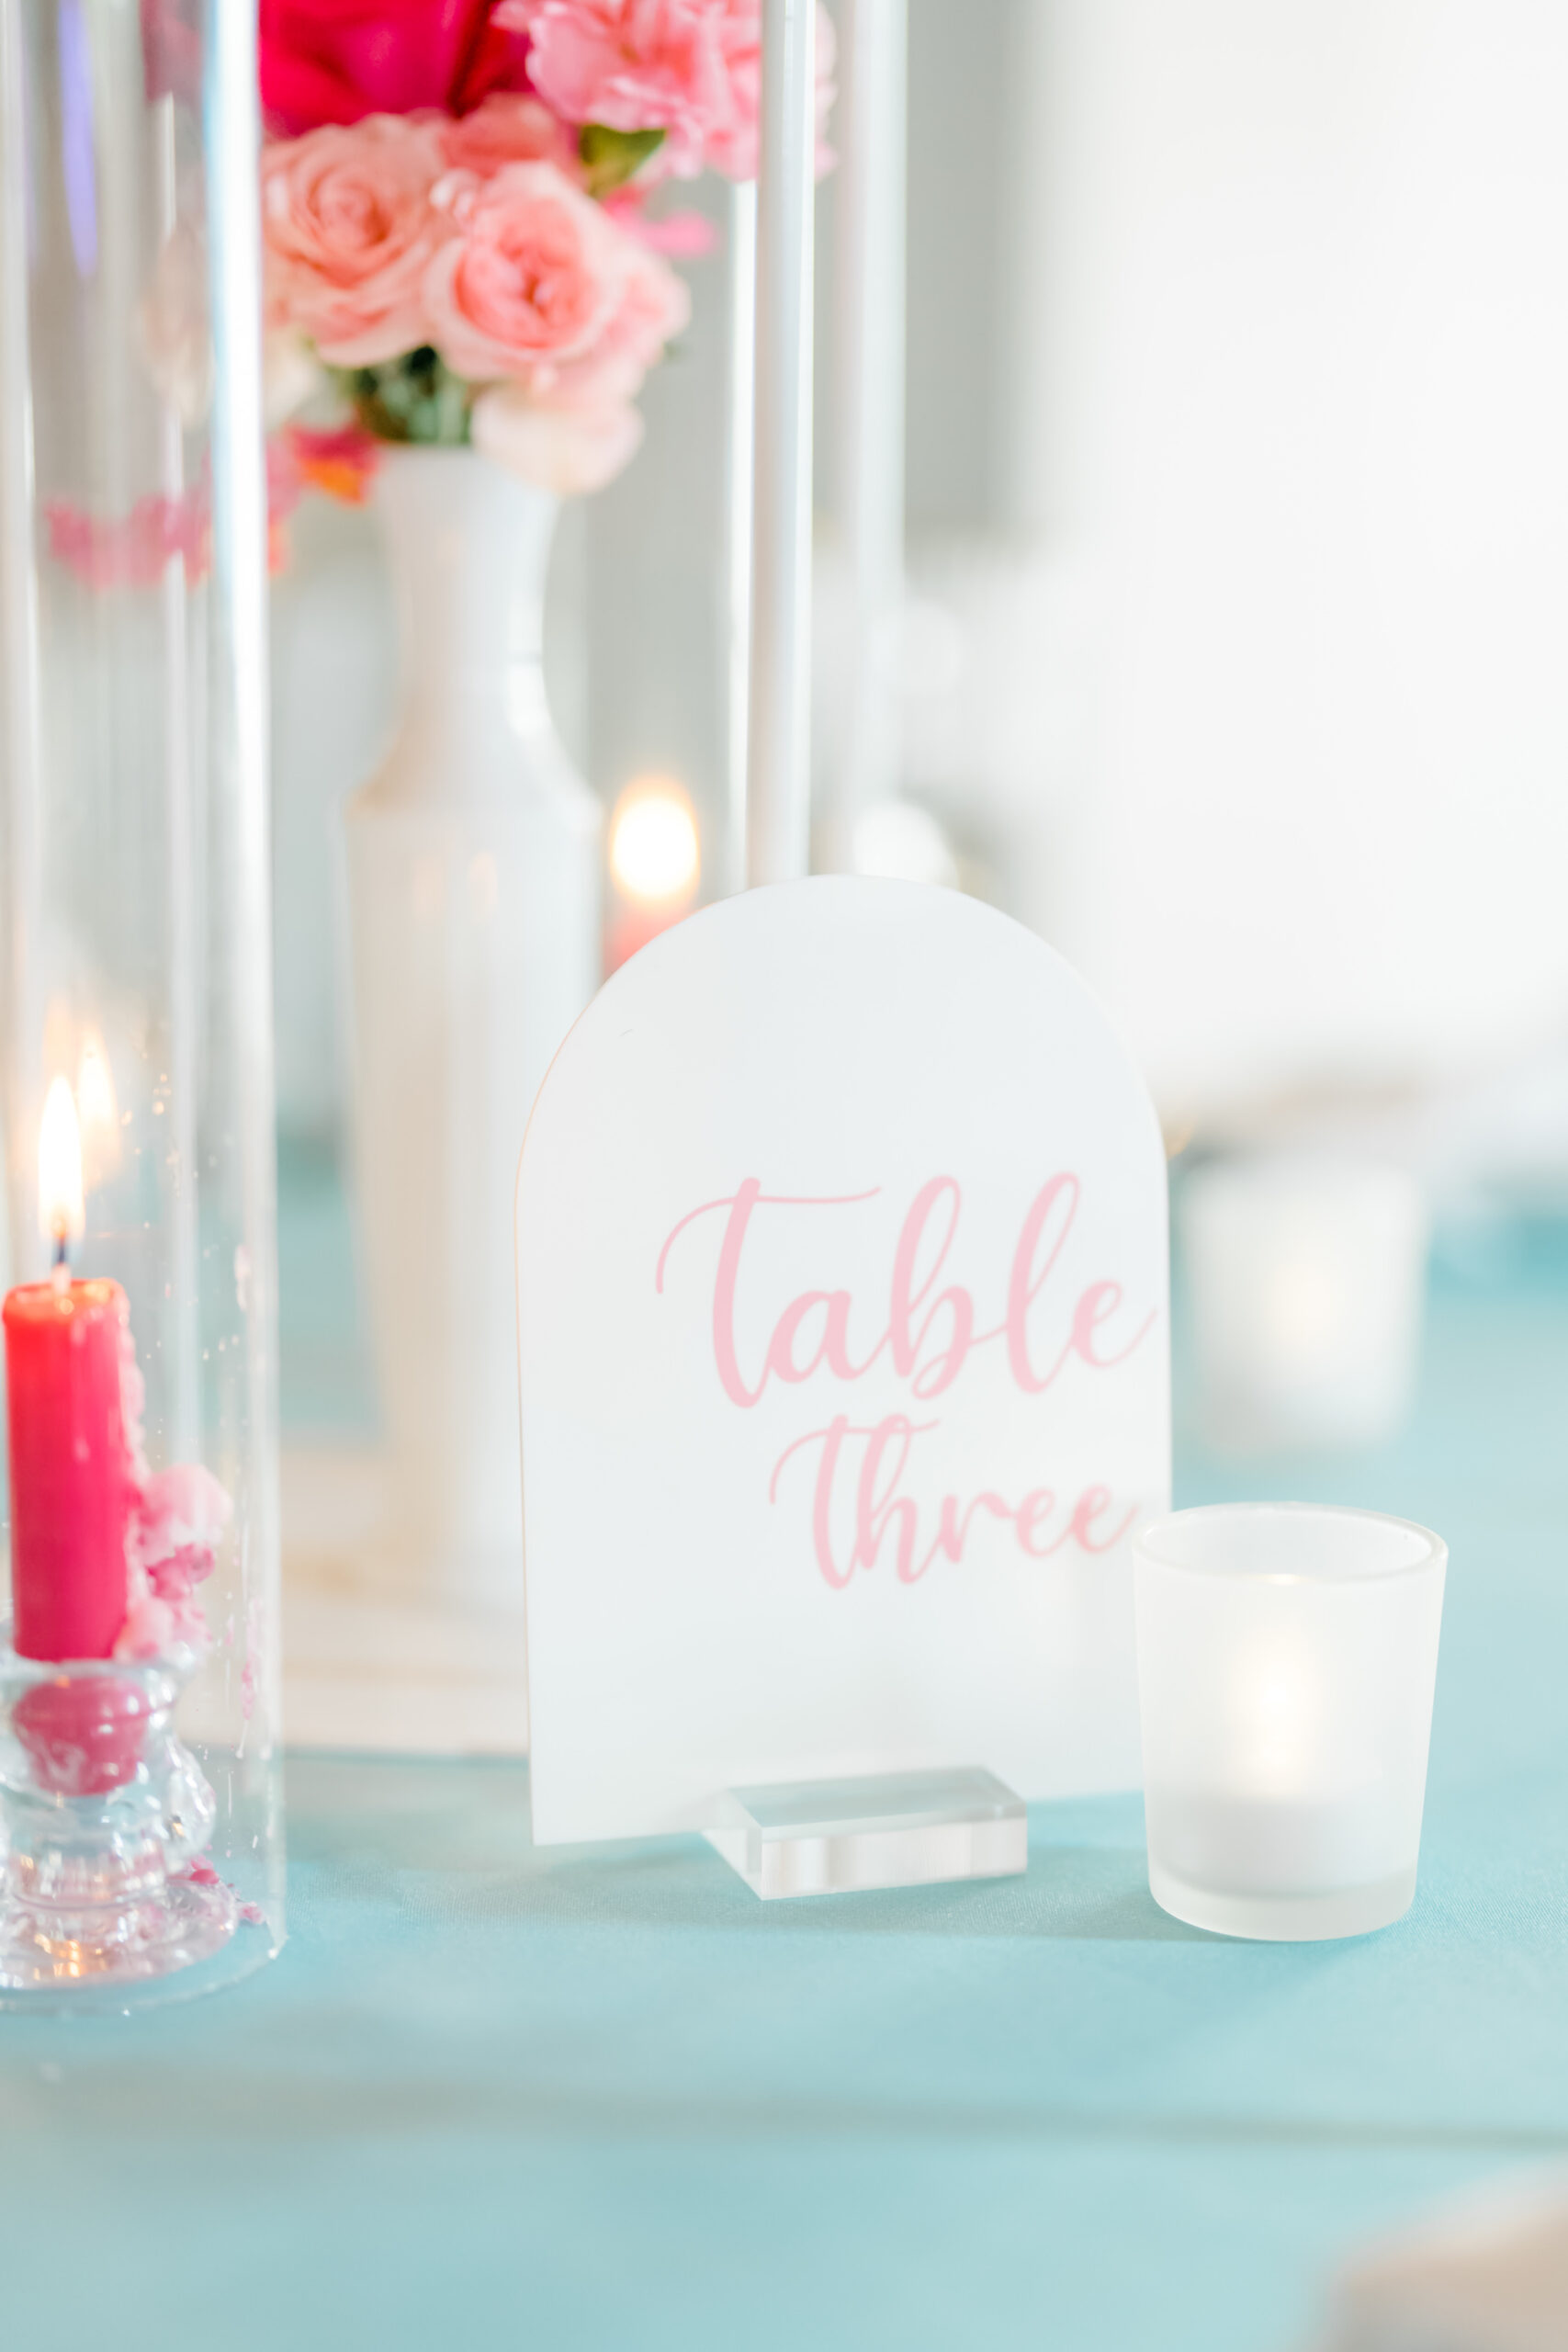 Whimsical Summer Inspired Wedding Decor, Turquoise Table Linen, Arched White and Pink Acrylic Table Number Signage